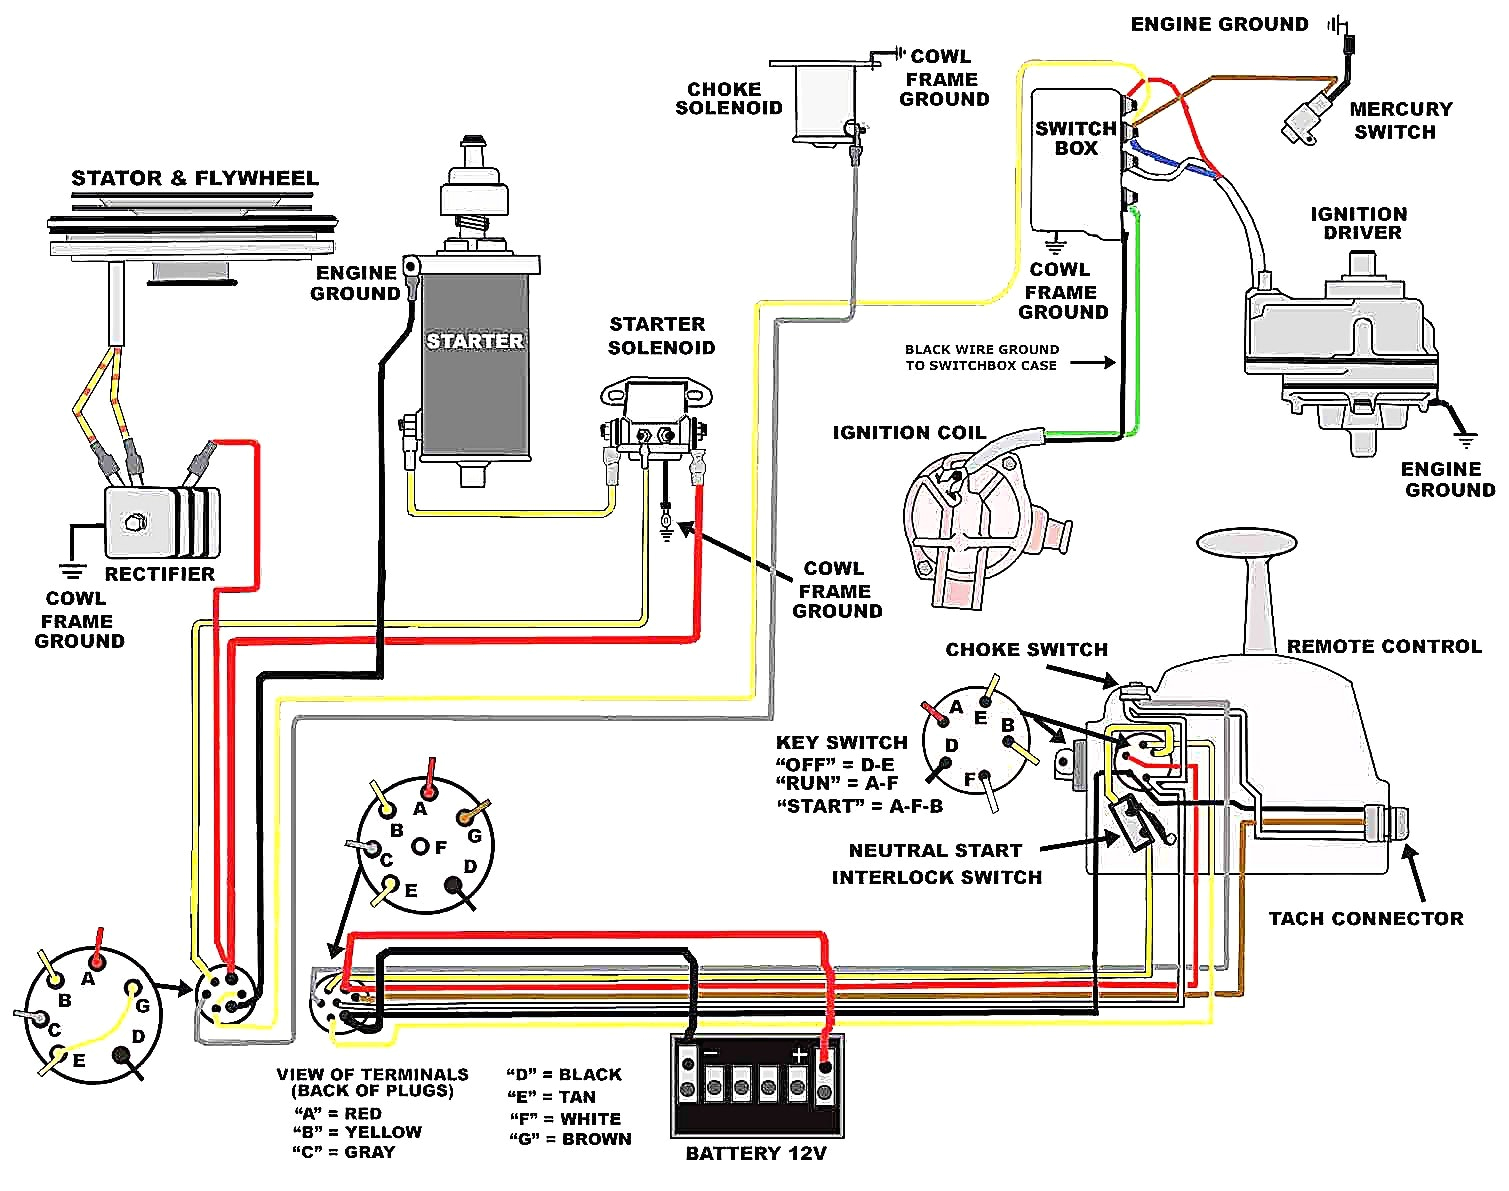 omc johnson evinrude ignition switch wiring diagram wiring omc ignition wiring diagram omc boat ignition wiring